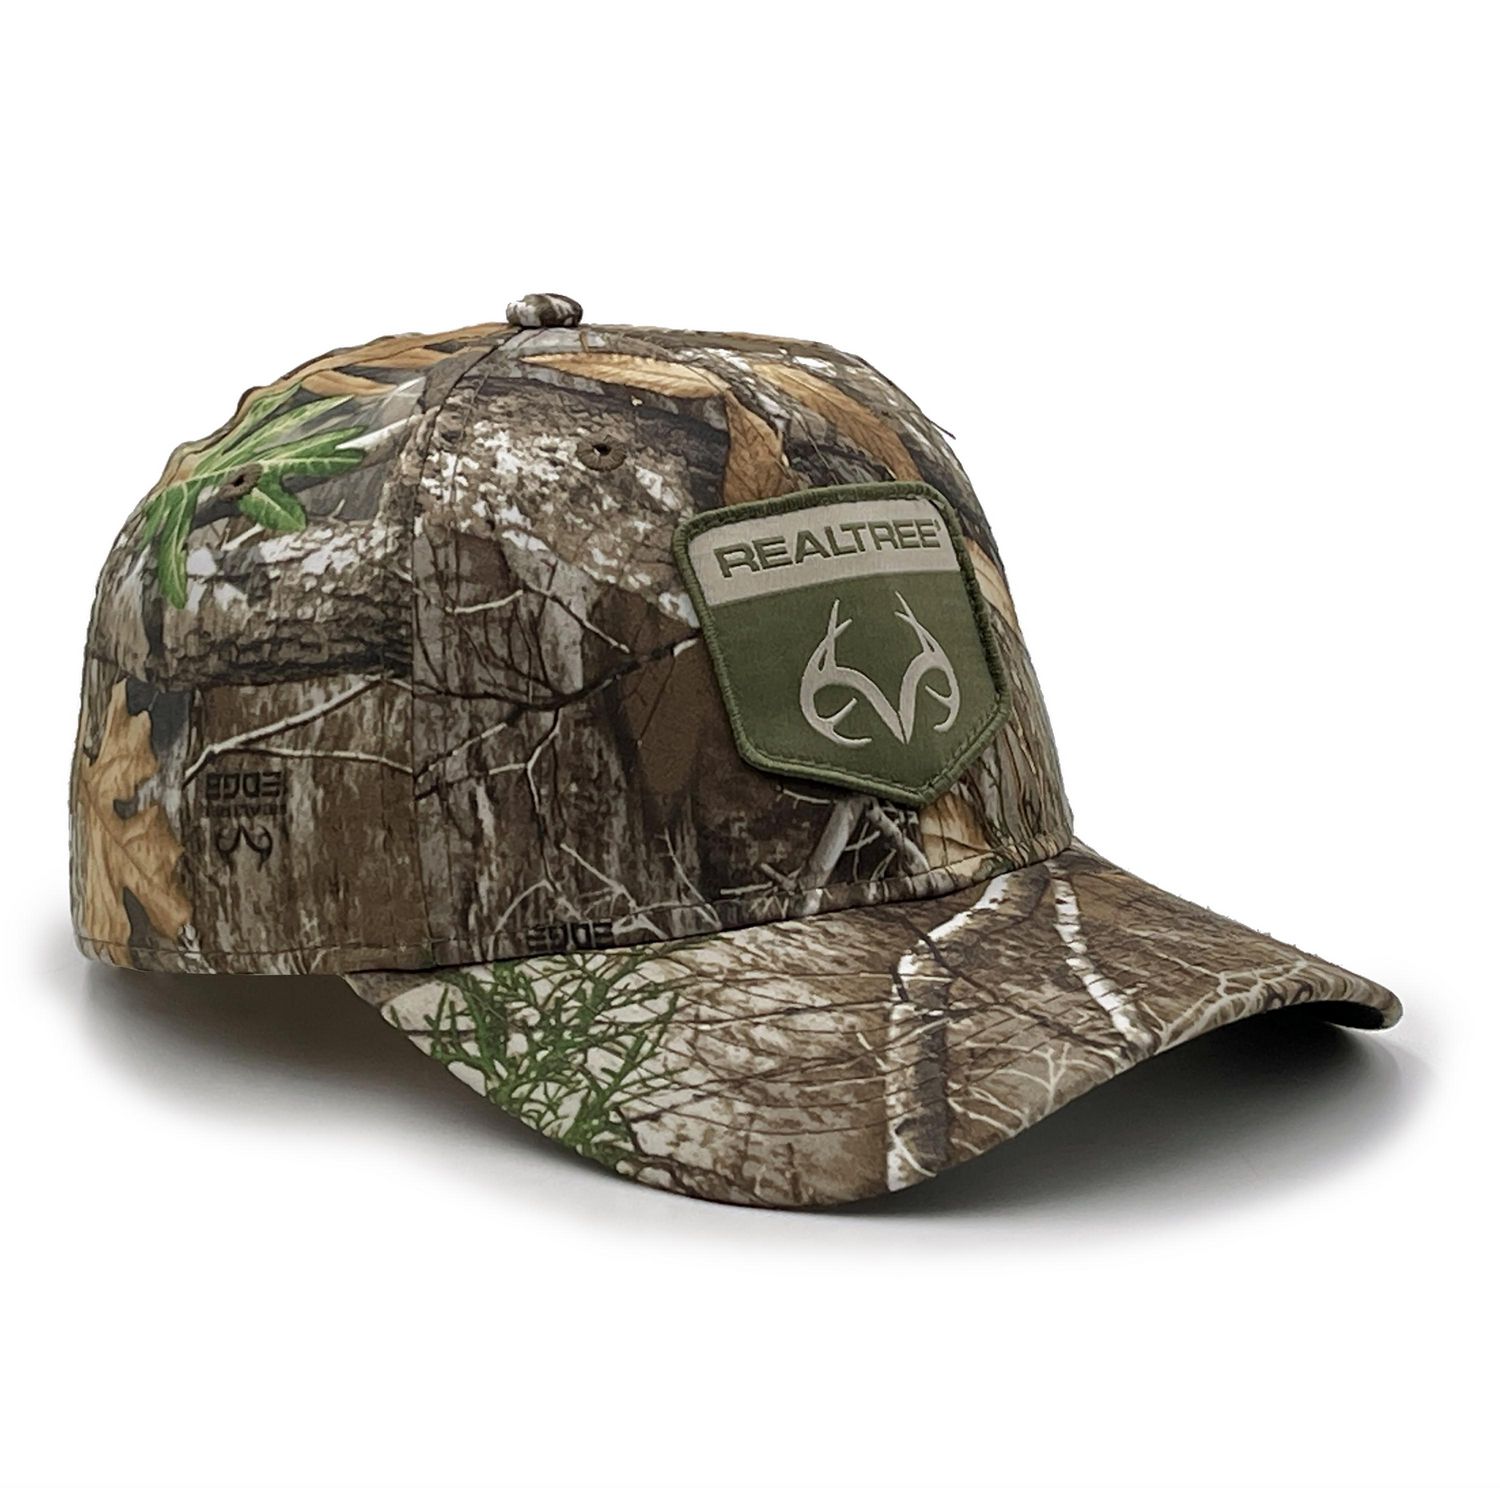 Realtree Lighted Hunting Structured Baseball Style Hat, Edge Camo, Adult 